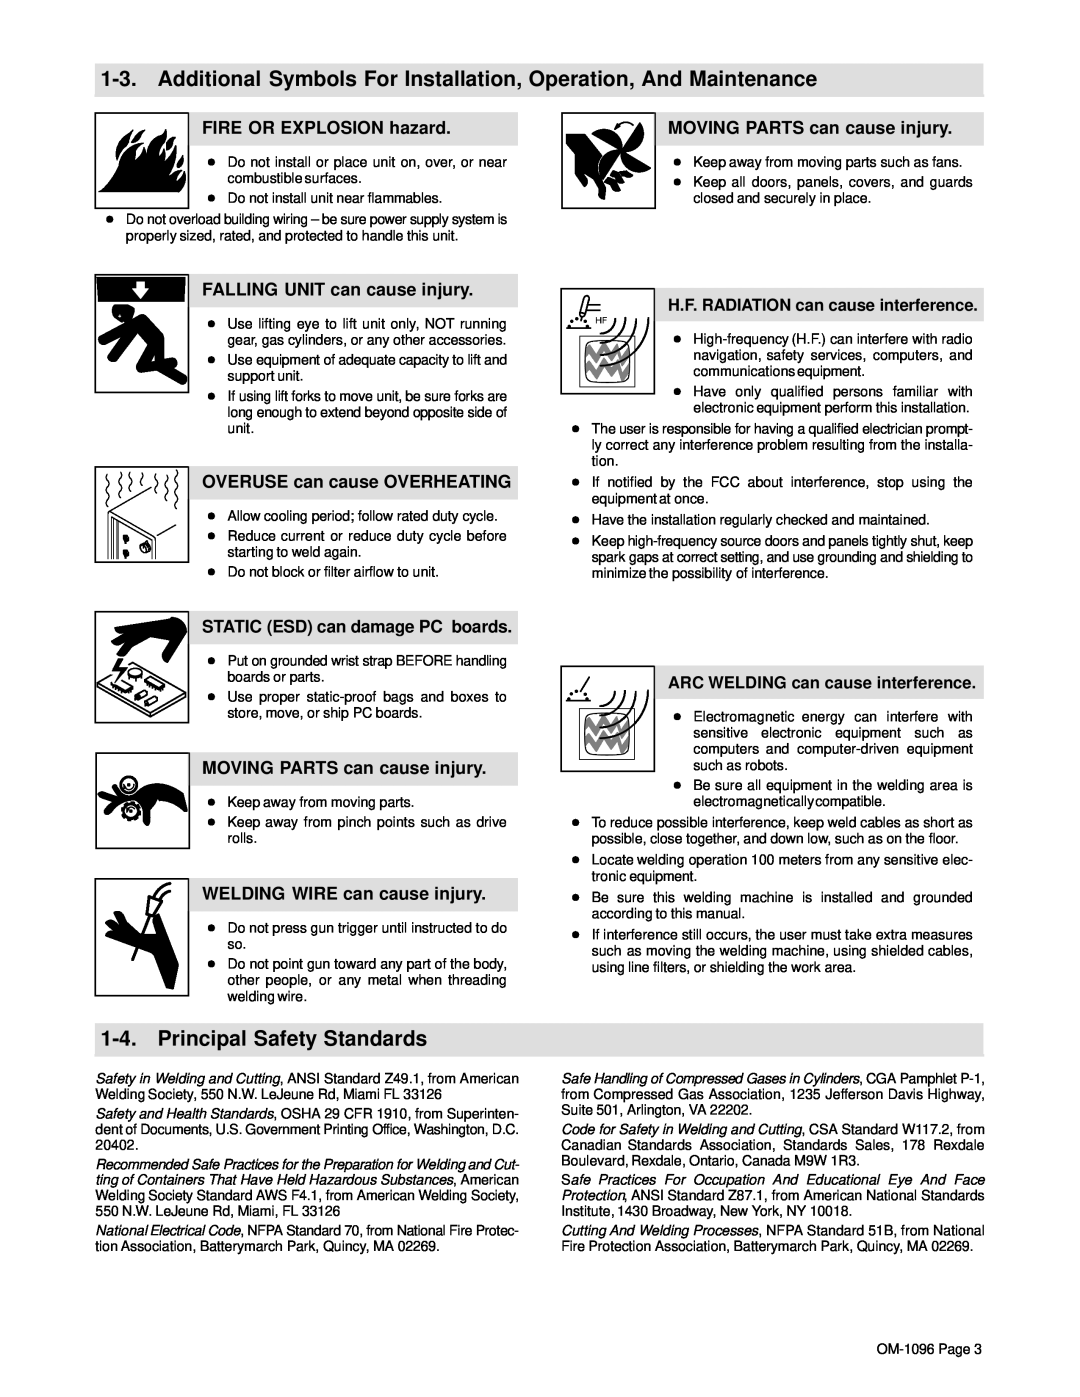 Miller Electric MSC-2 manual Additional Symbols For Installation, Operation, And Maintenance, Principal Safety Standards 